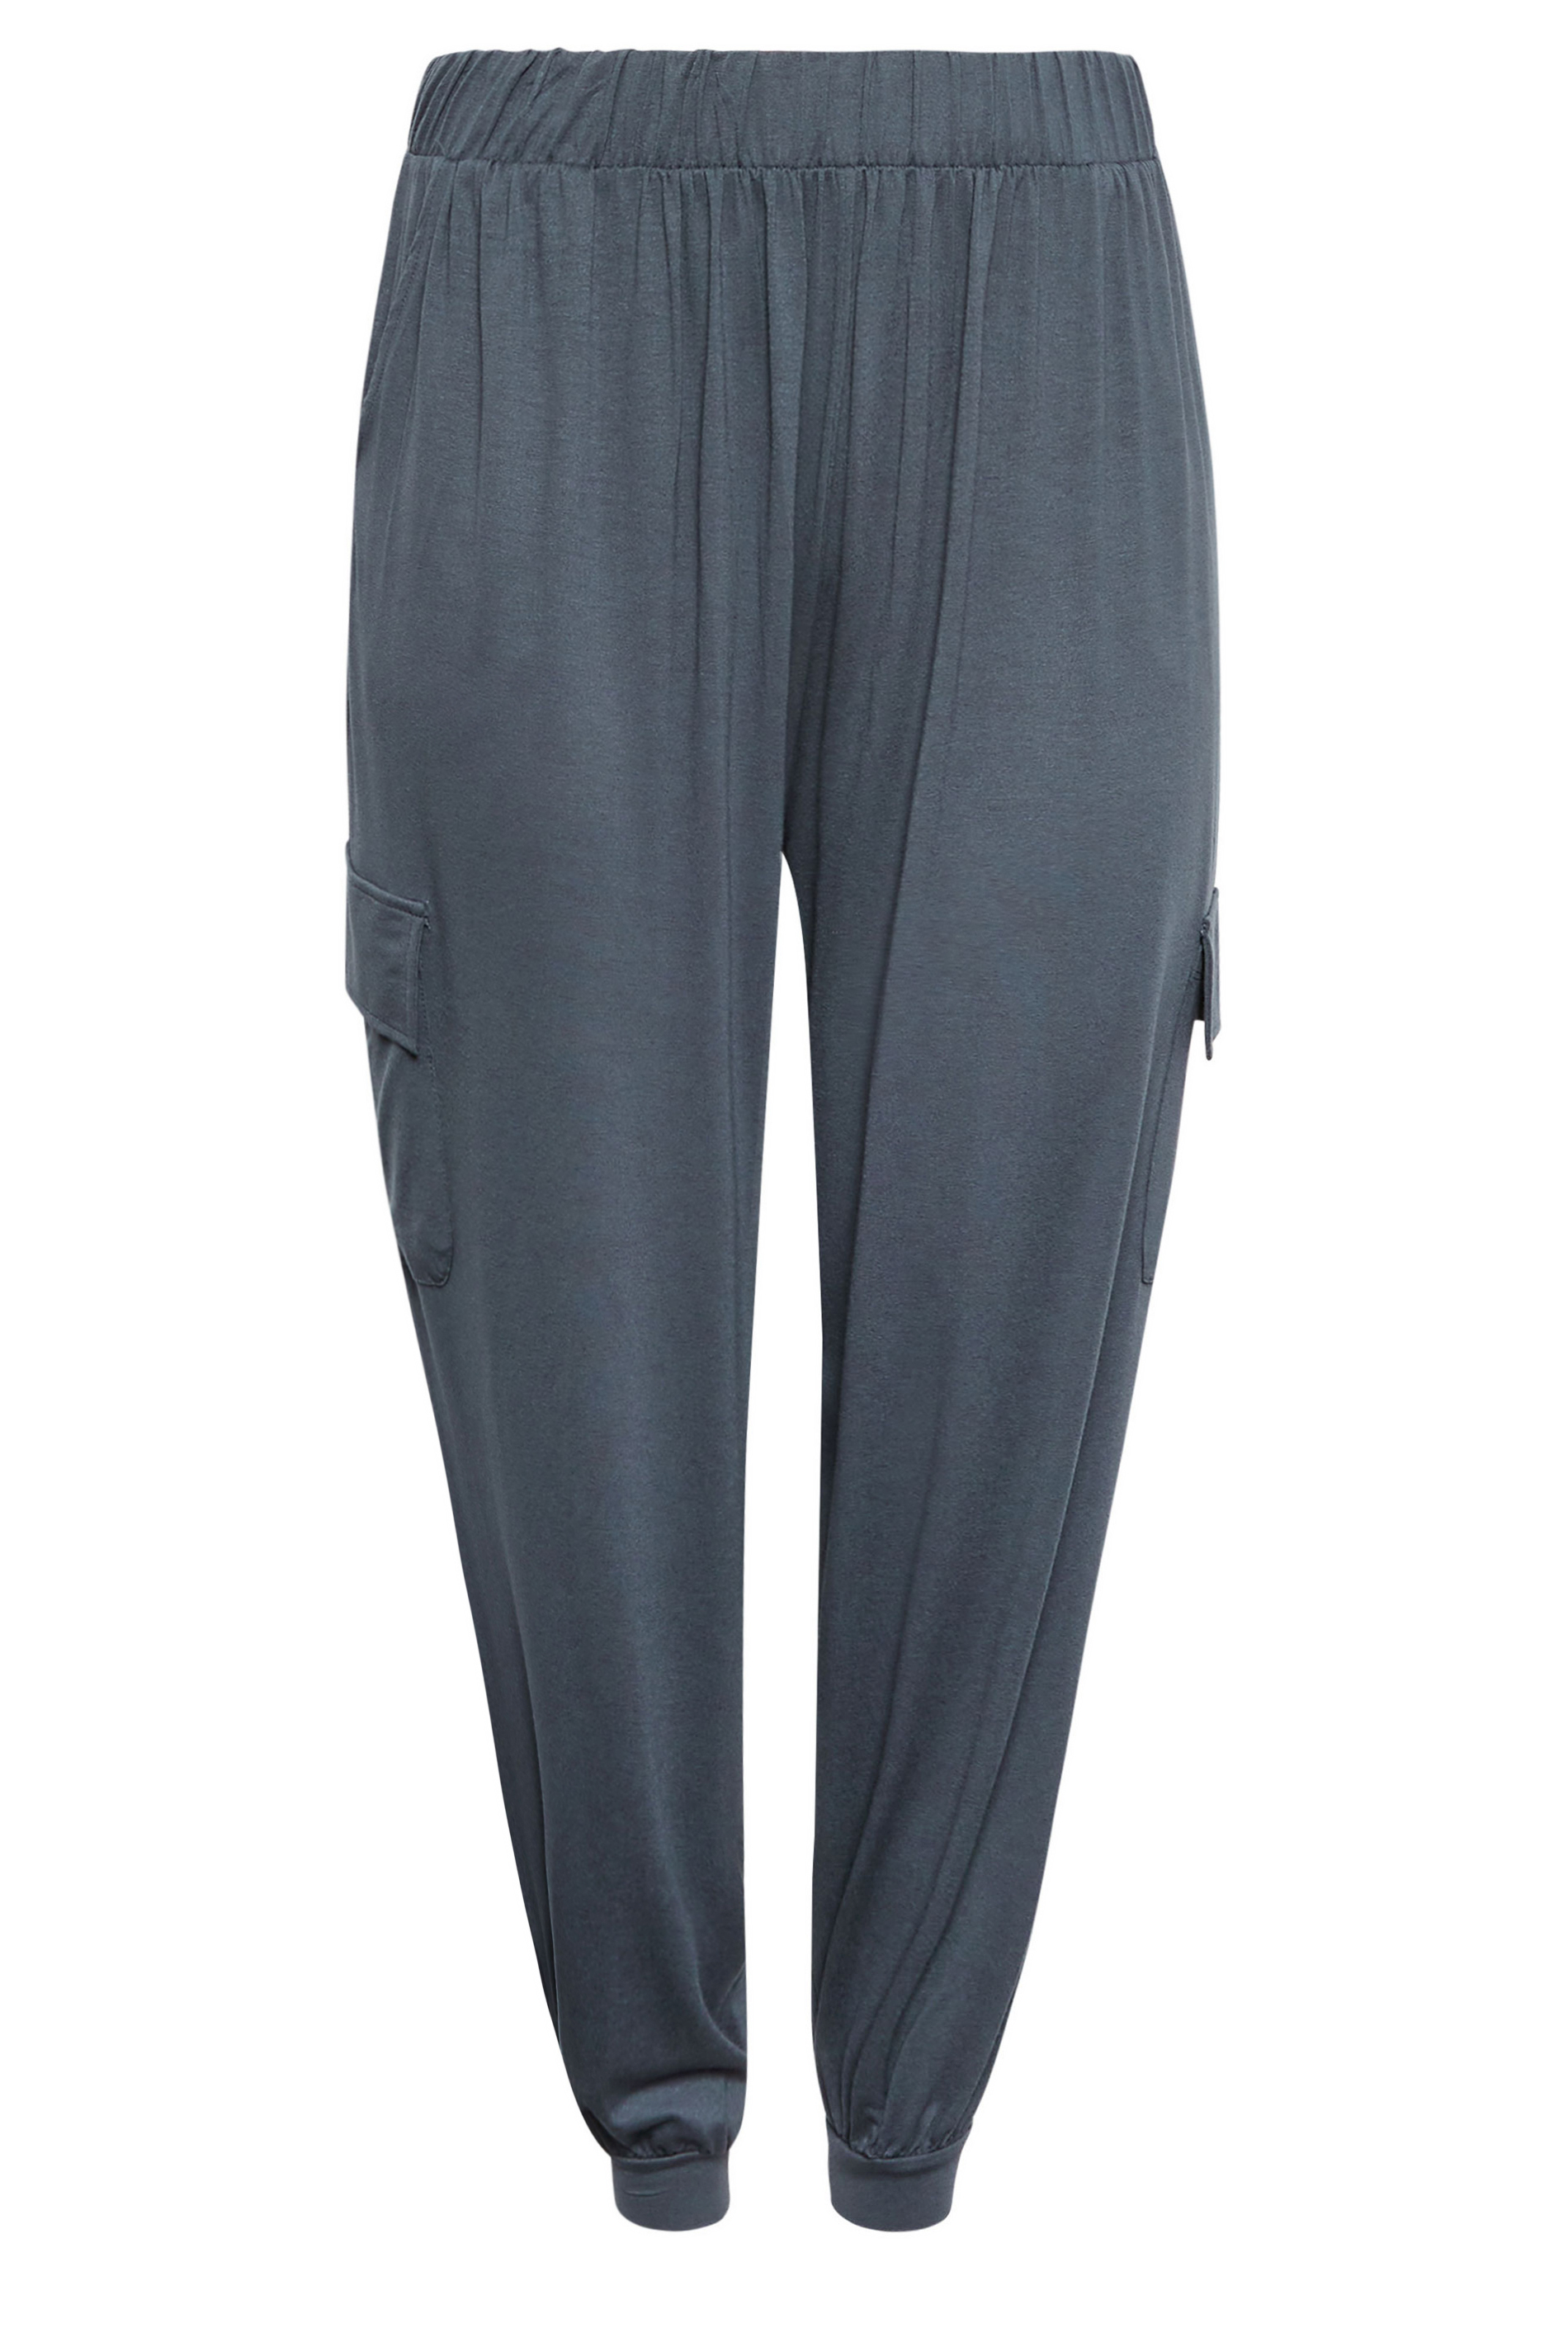 AnyBody Tall Cozy Knit Luxe Jogger Pant 